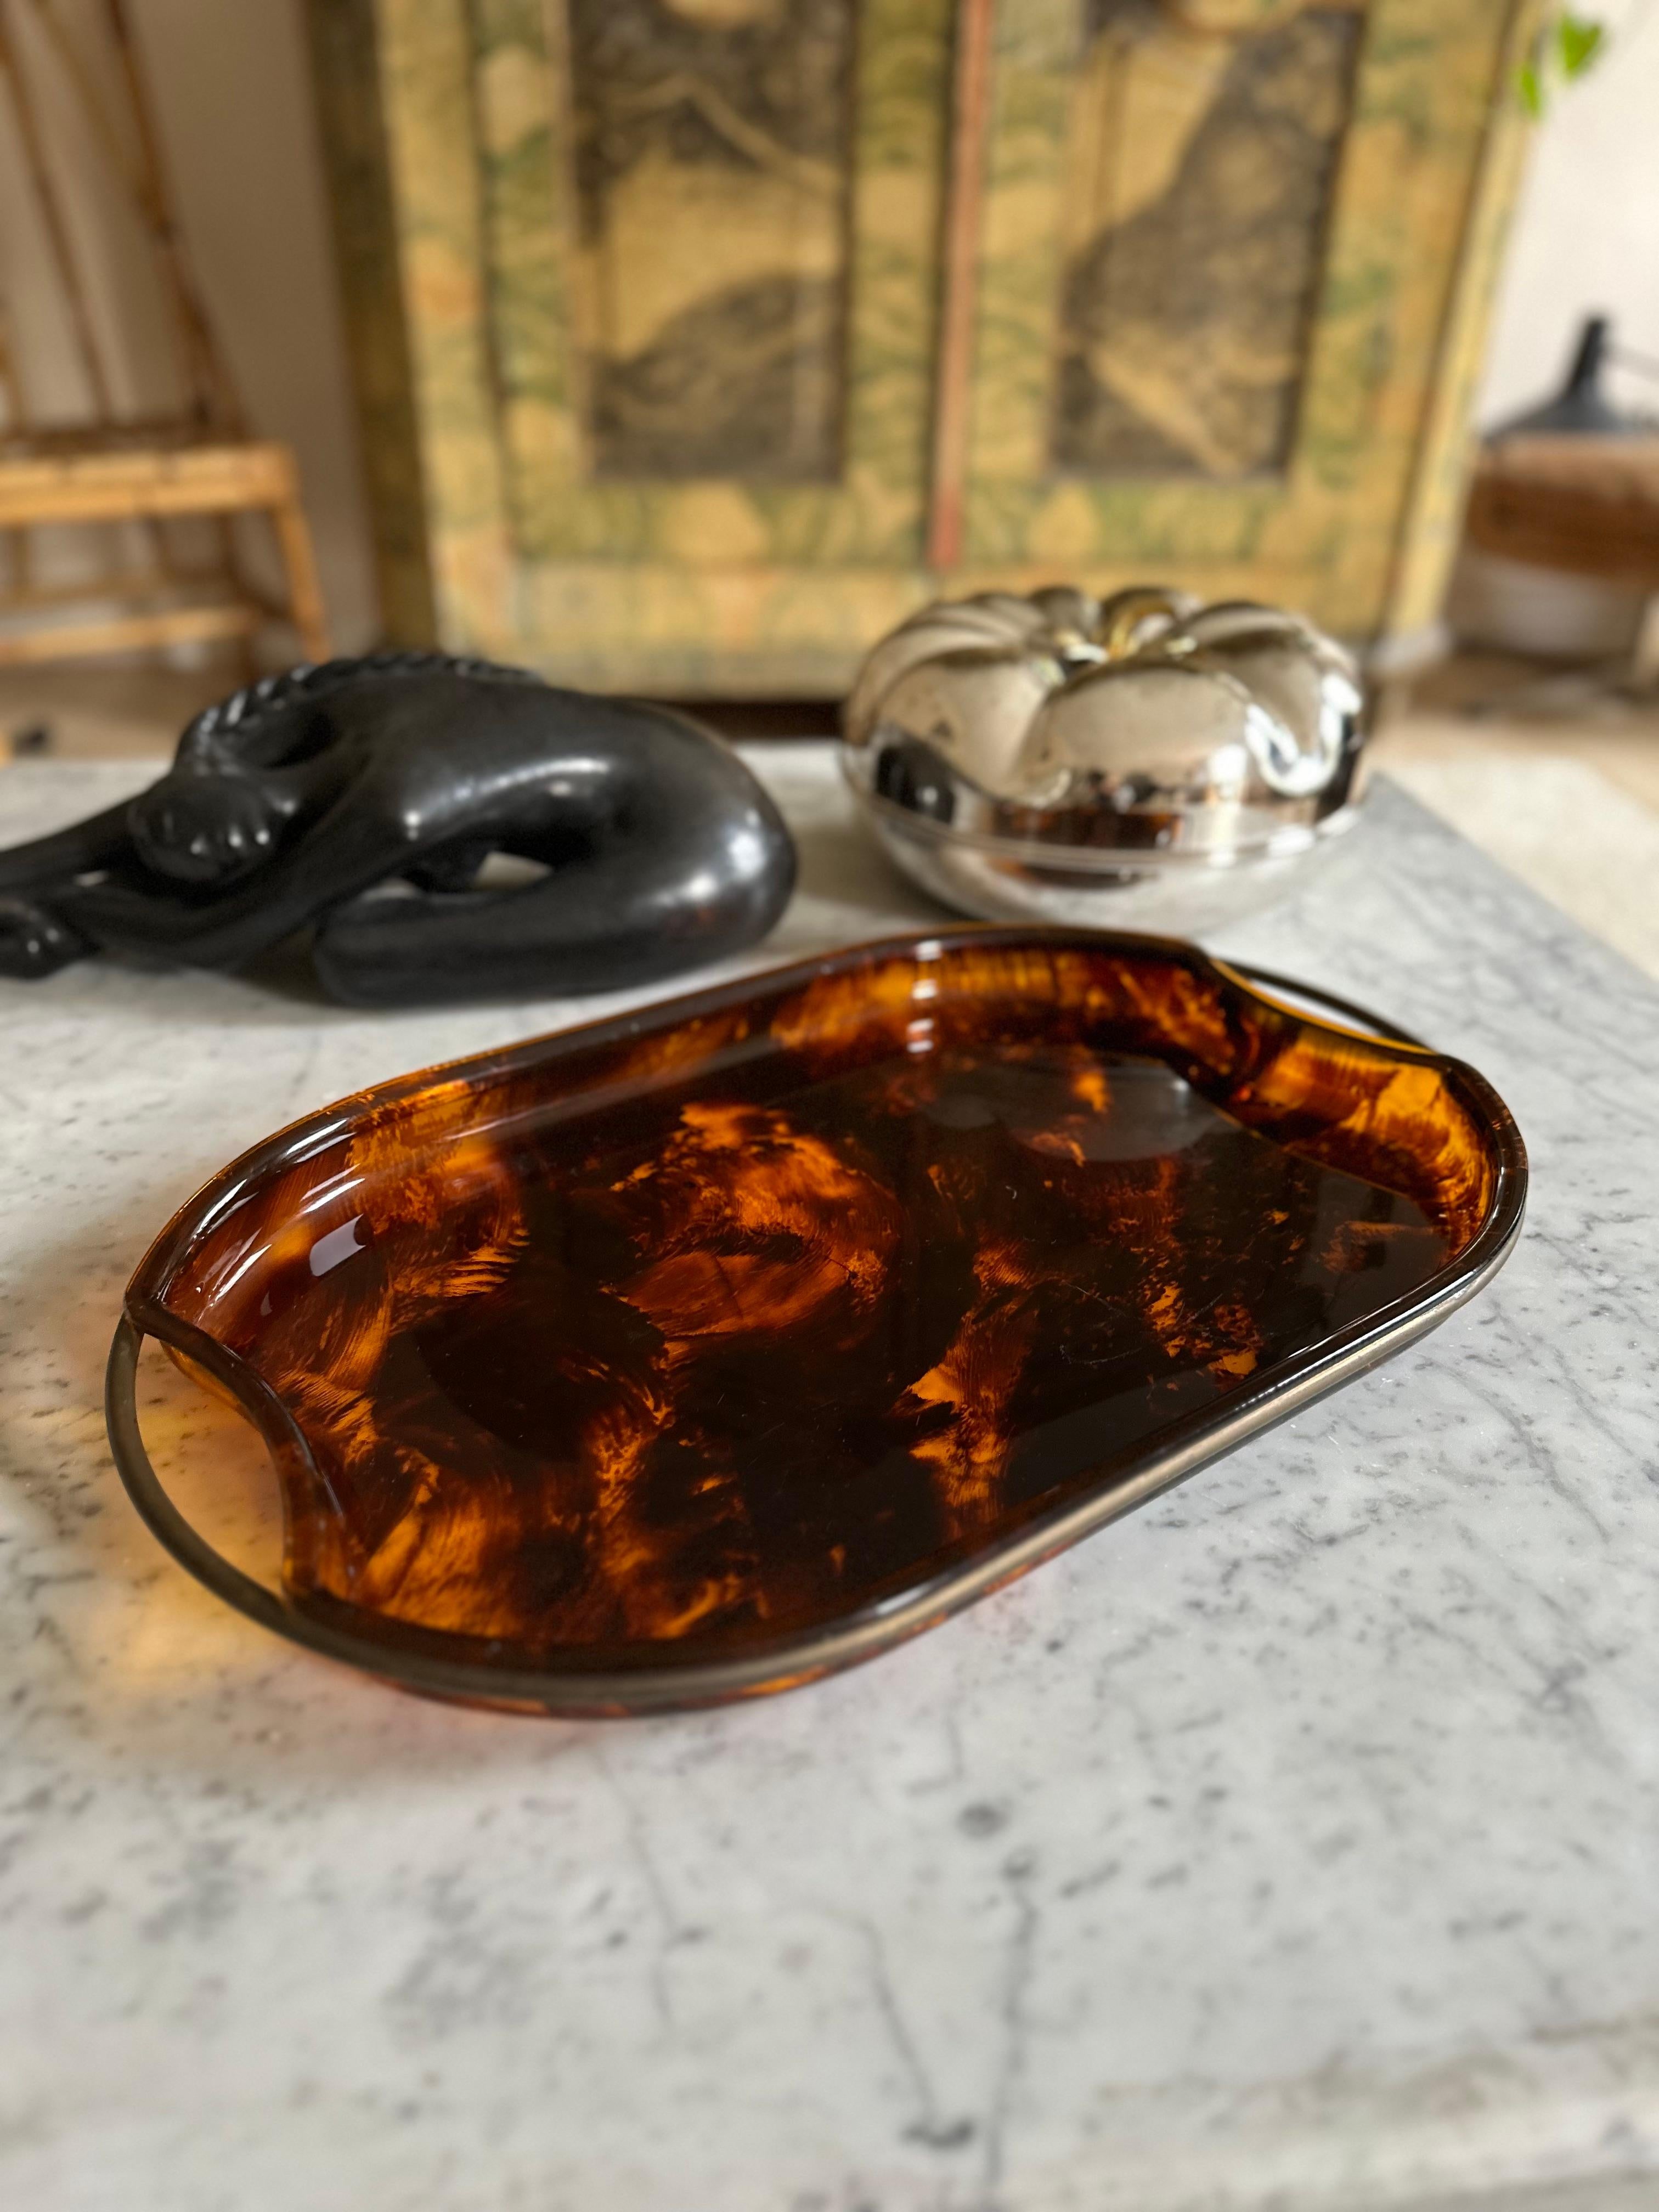  Guzzini’s Oval Lucite Serving Tray from 1970s Italy – Faux Tortoiseshell -brass For Sale 11